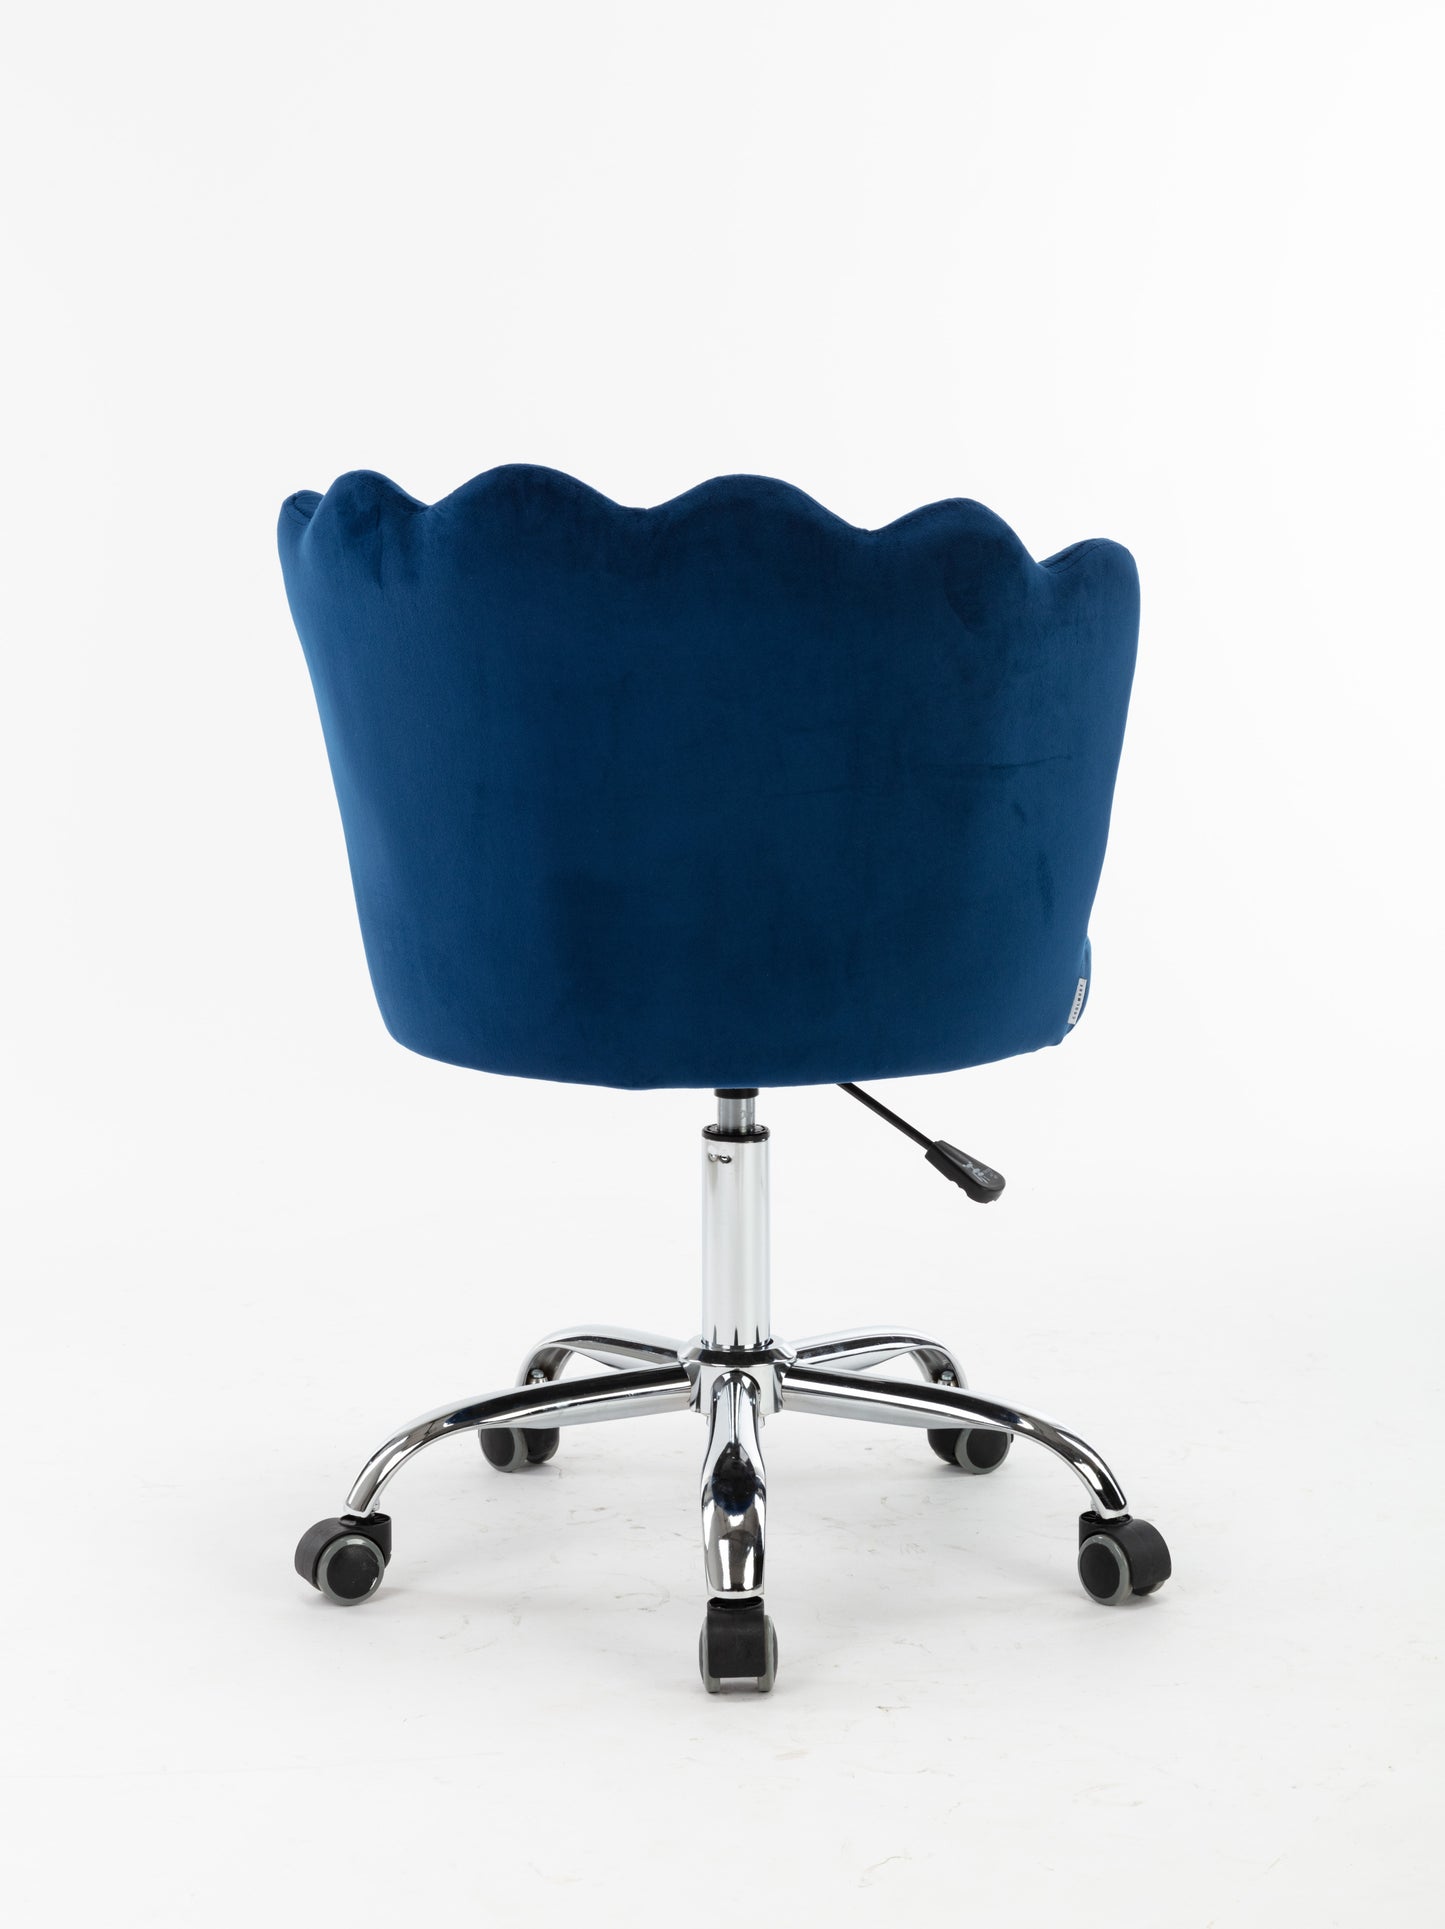 Swivel Shell Chair for Living Room/Bed Room, Modern Leisure office Chair Blue